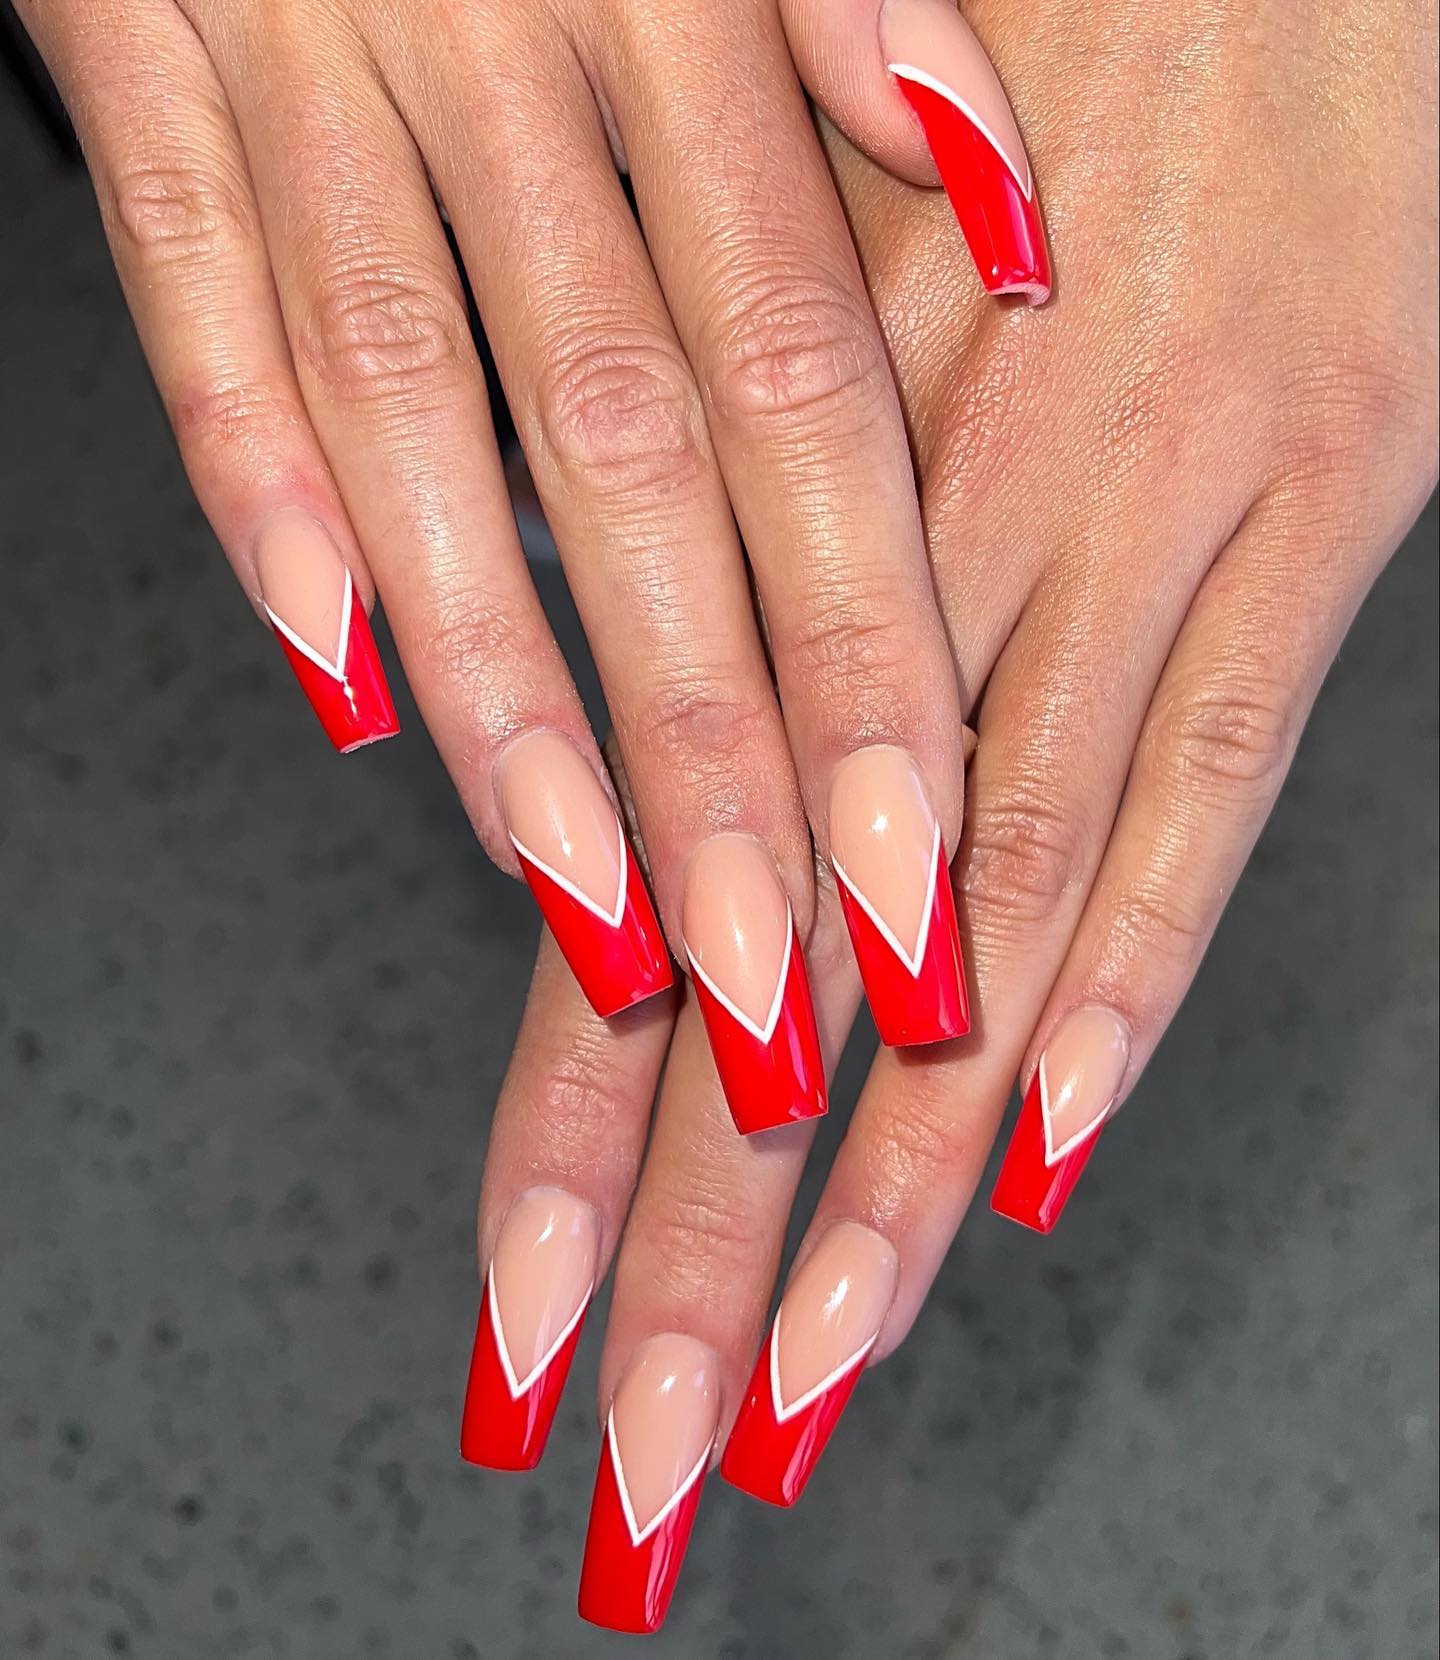 Long Coffin Nails with Red Tips